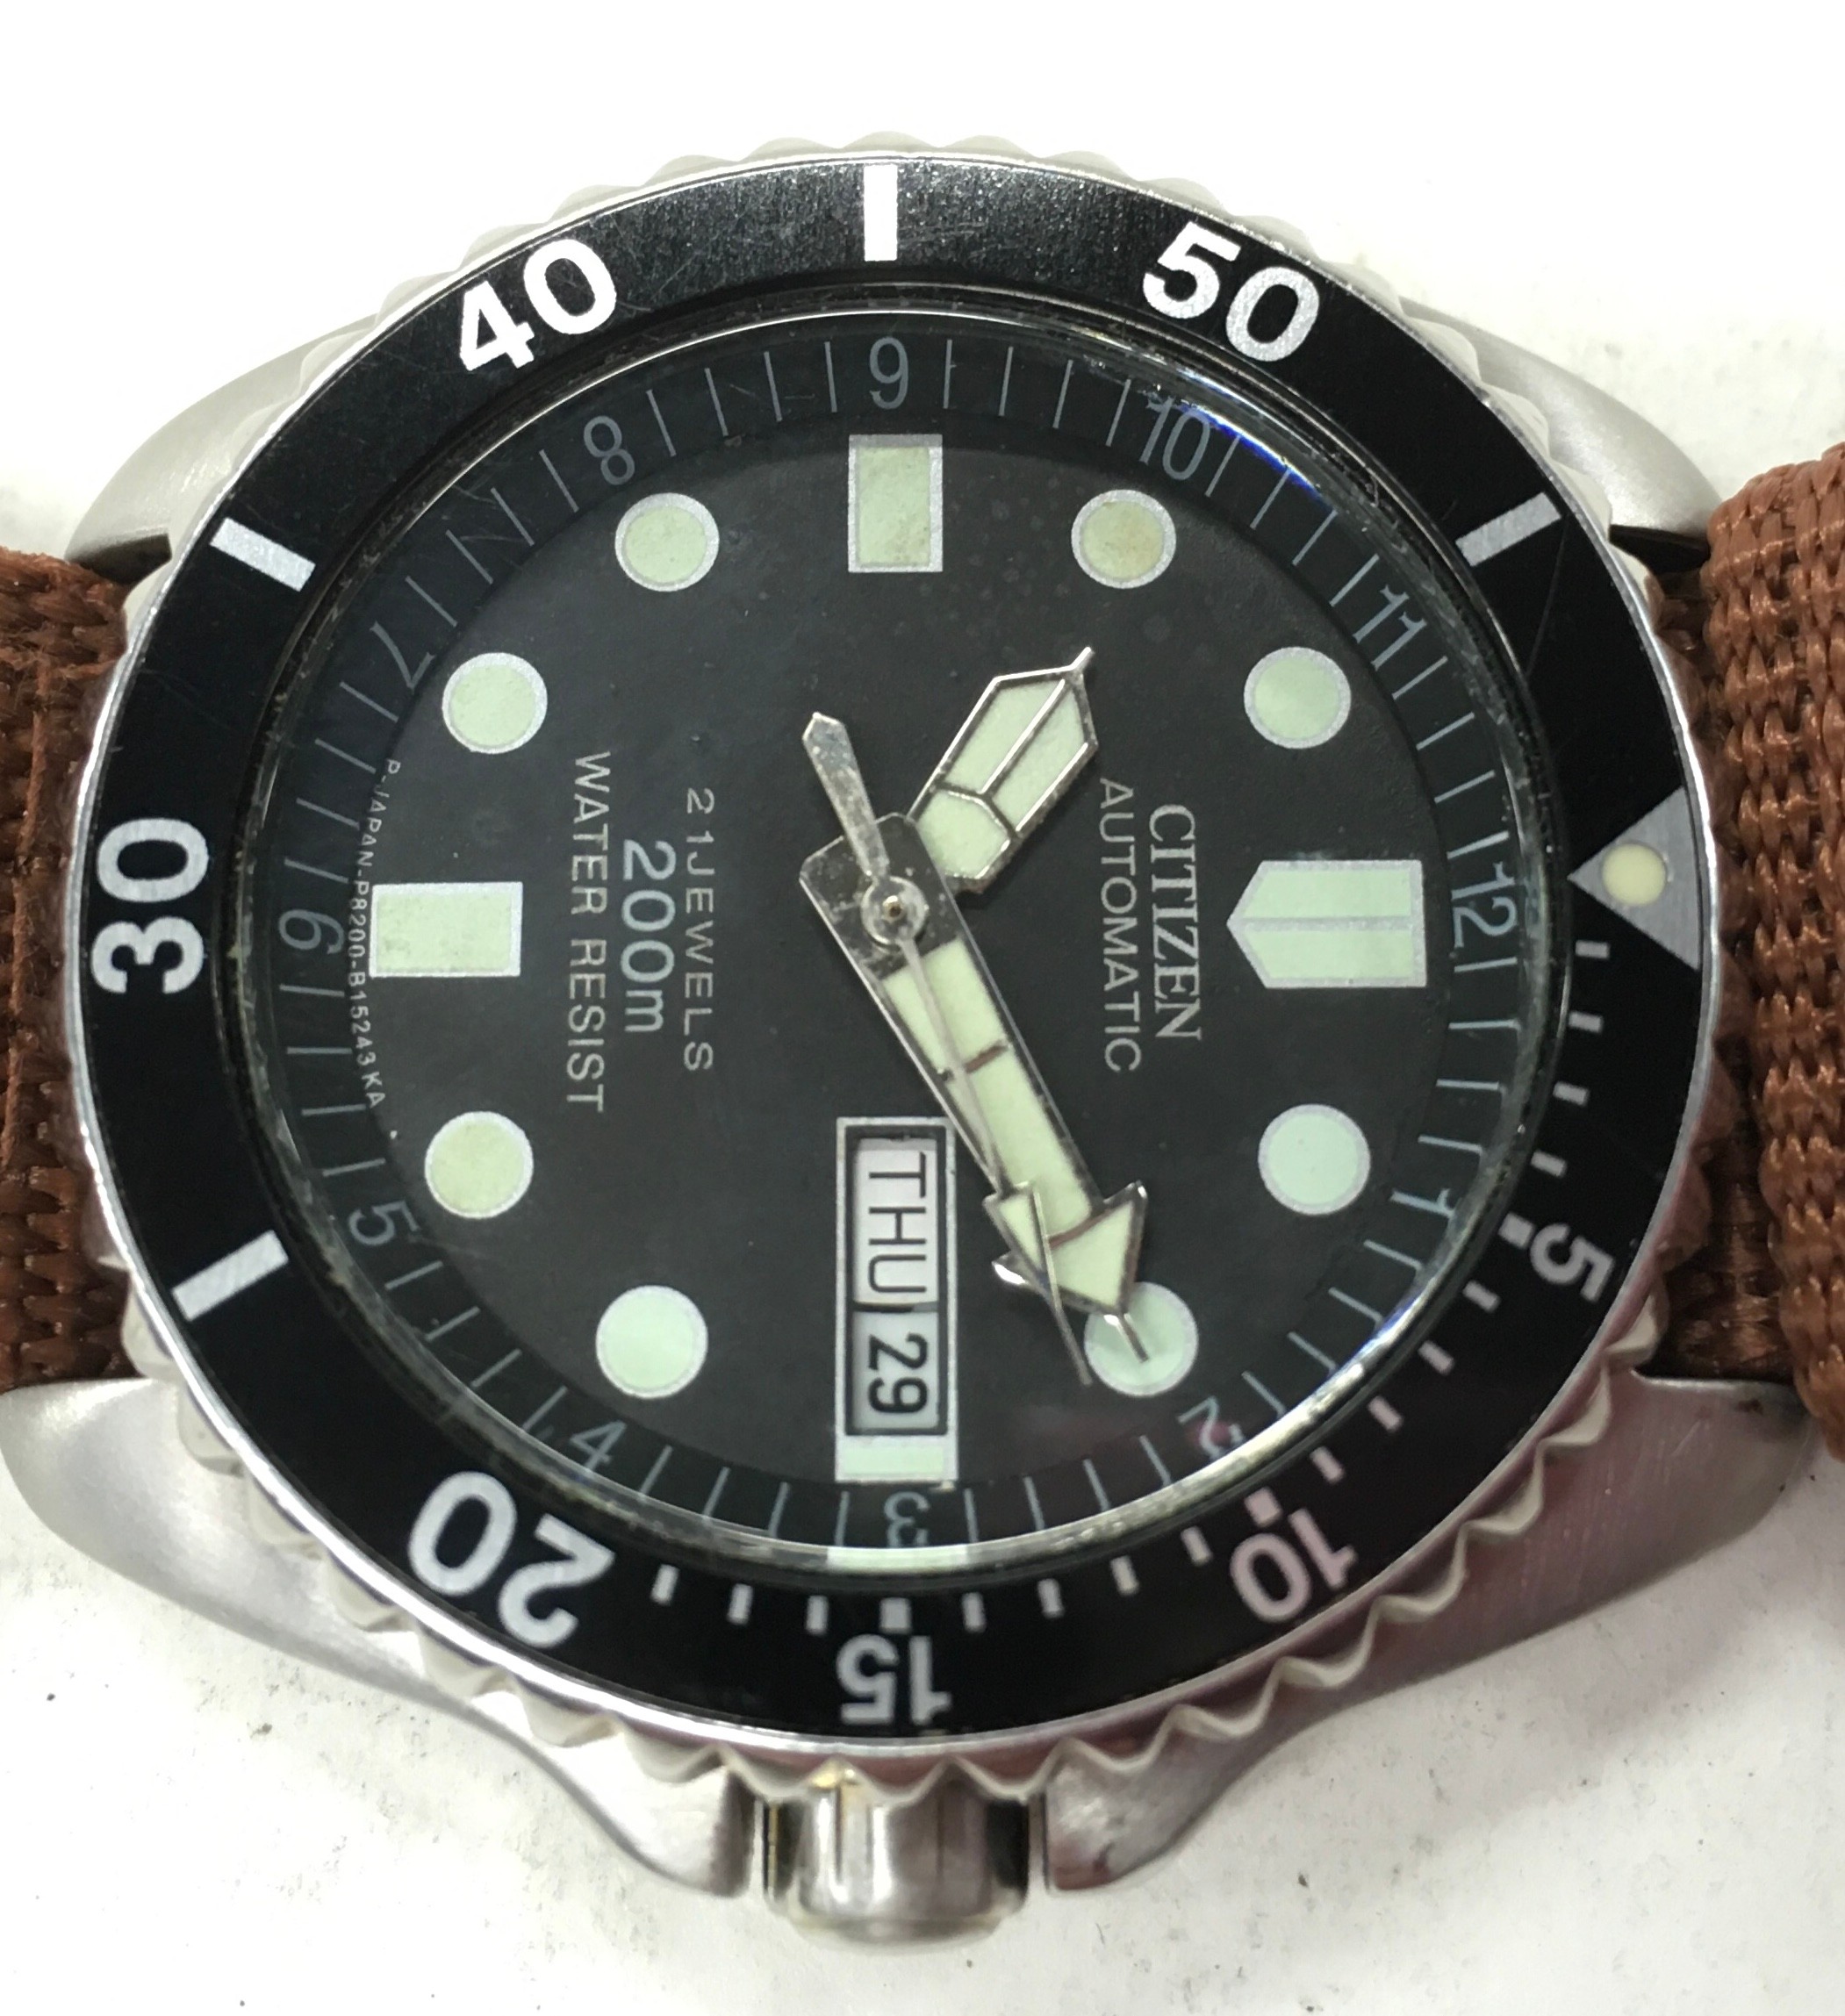 Citizen automatic gents 200m divers watch with screw down crown. Model ref 4-824521y. Seen working. - Image 2 of 4